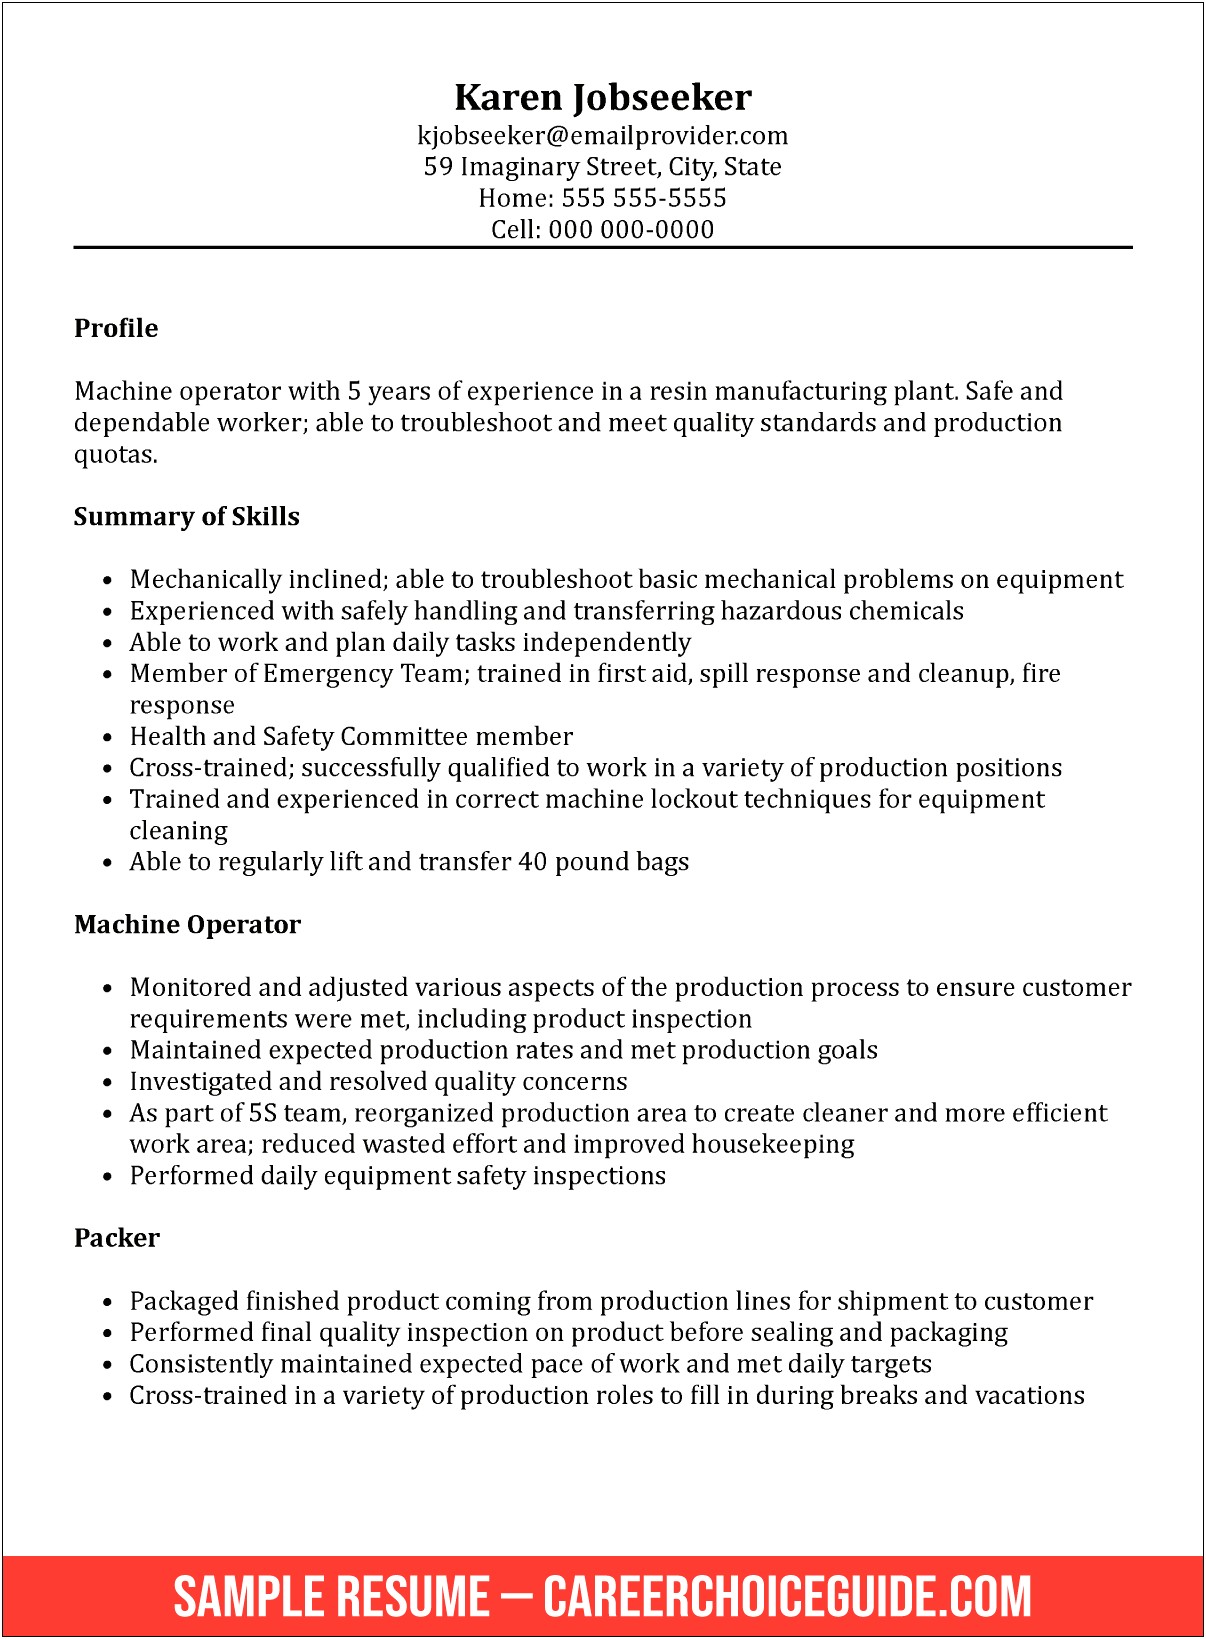 Example Profile For A Resume